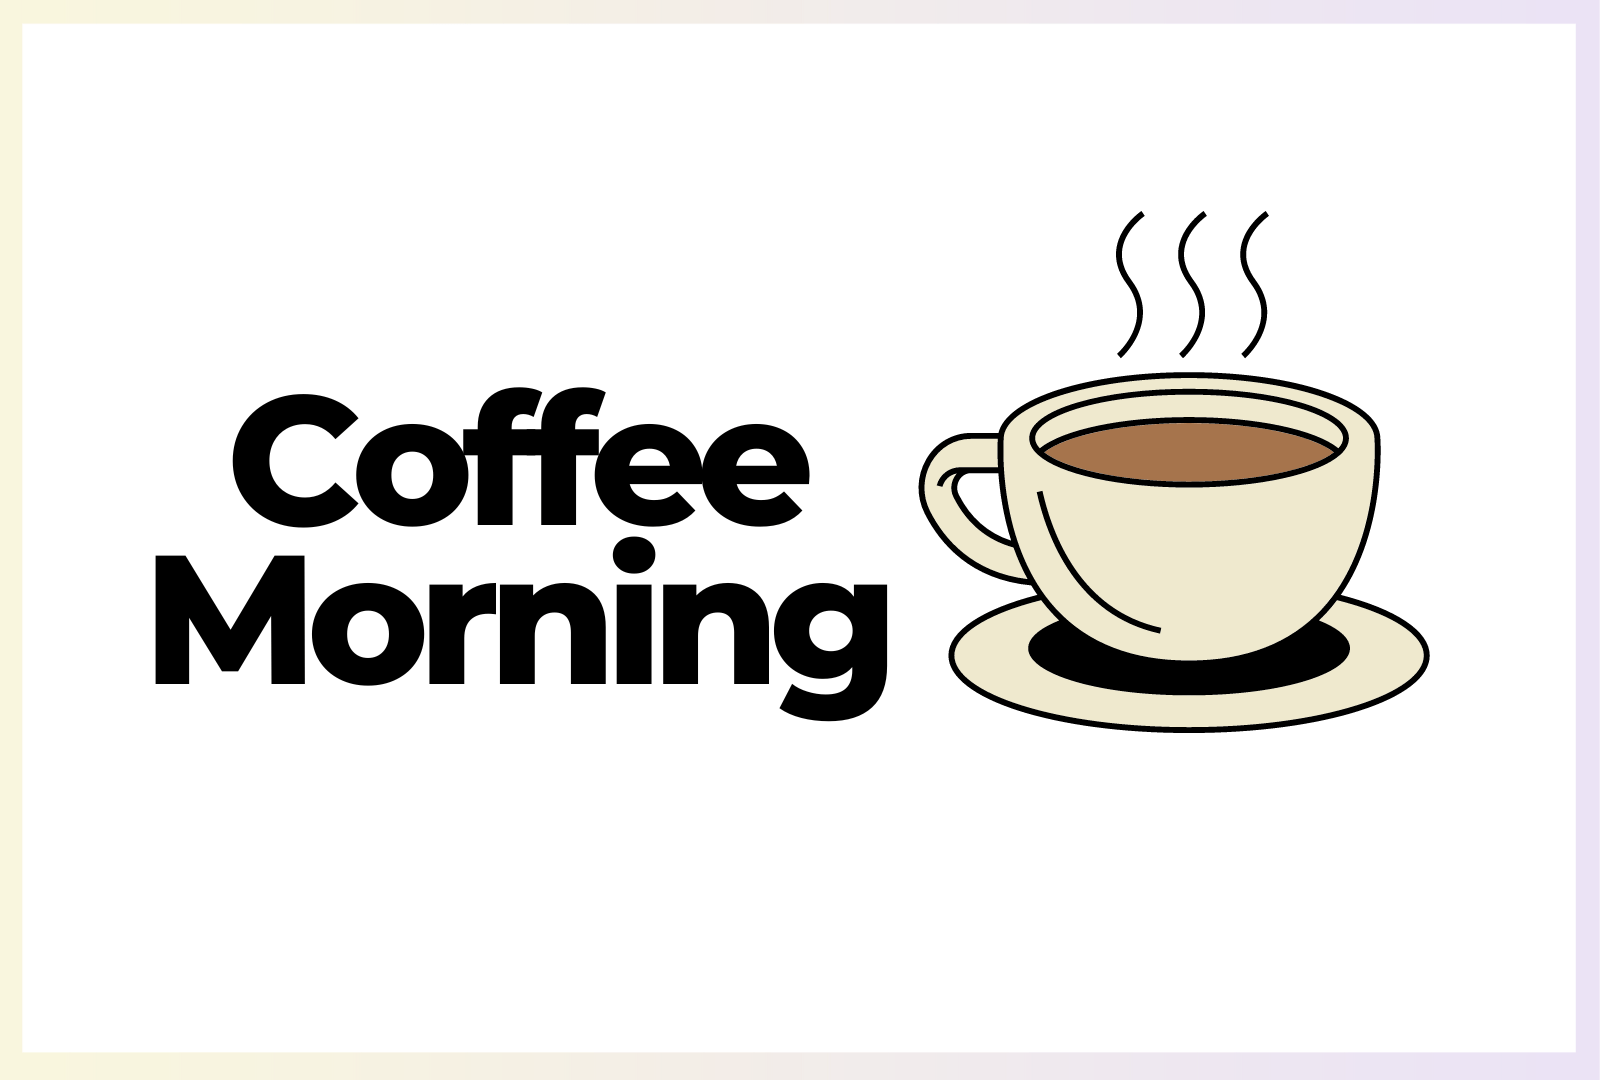 Text saying "Coffee Morning" next to an image of a cup of coffee